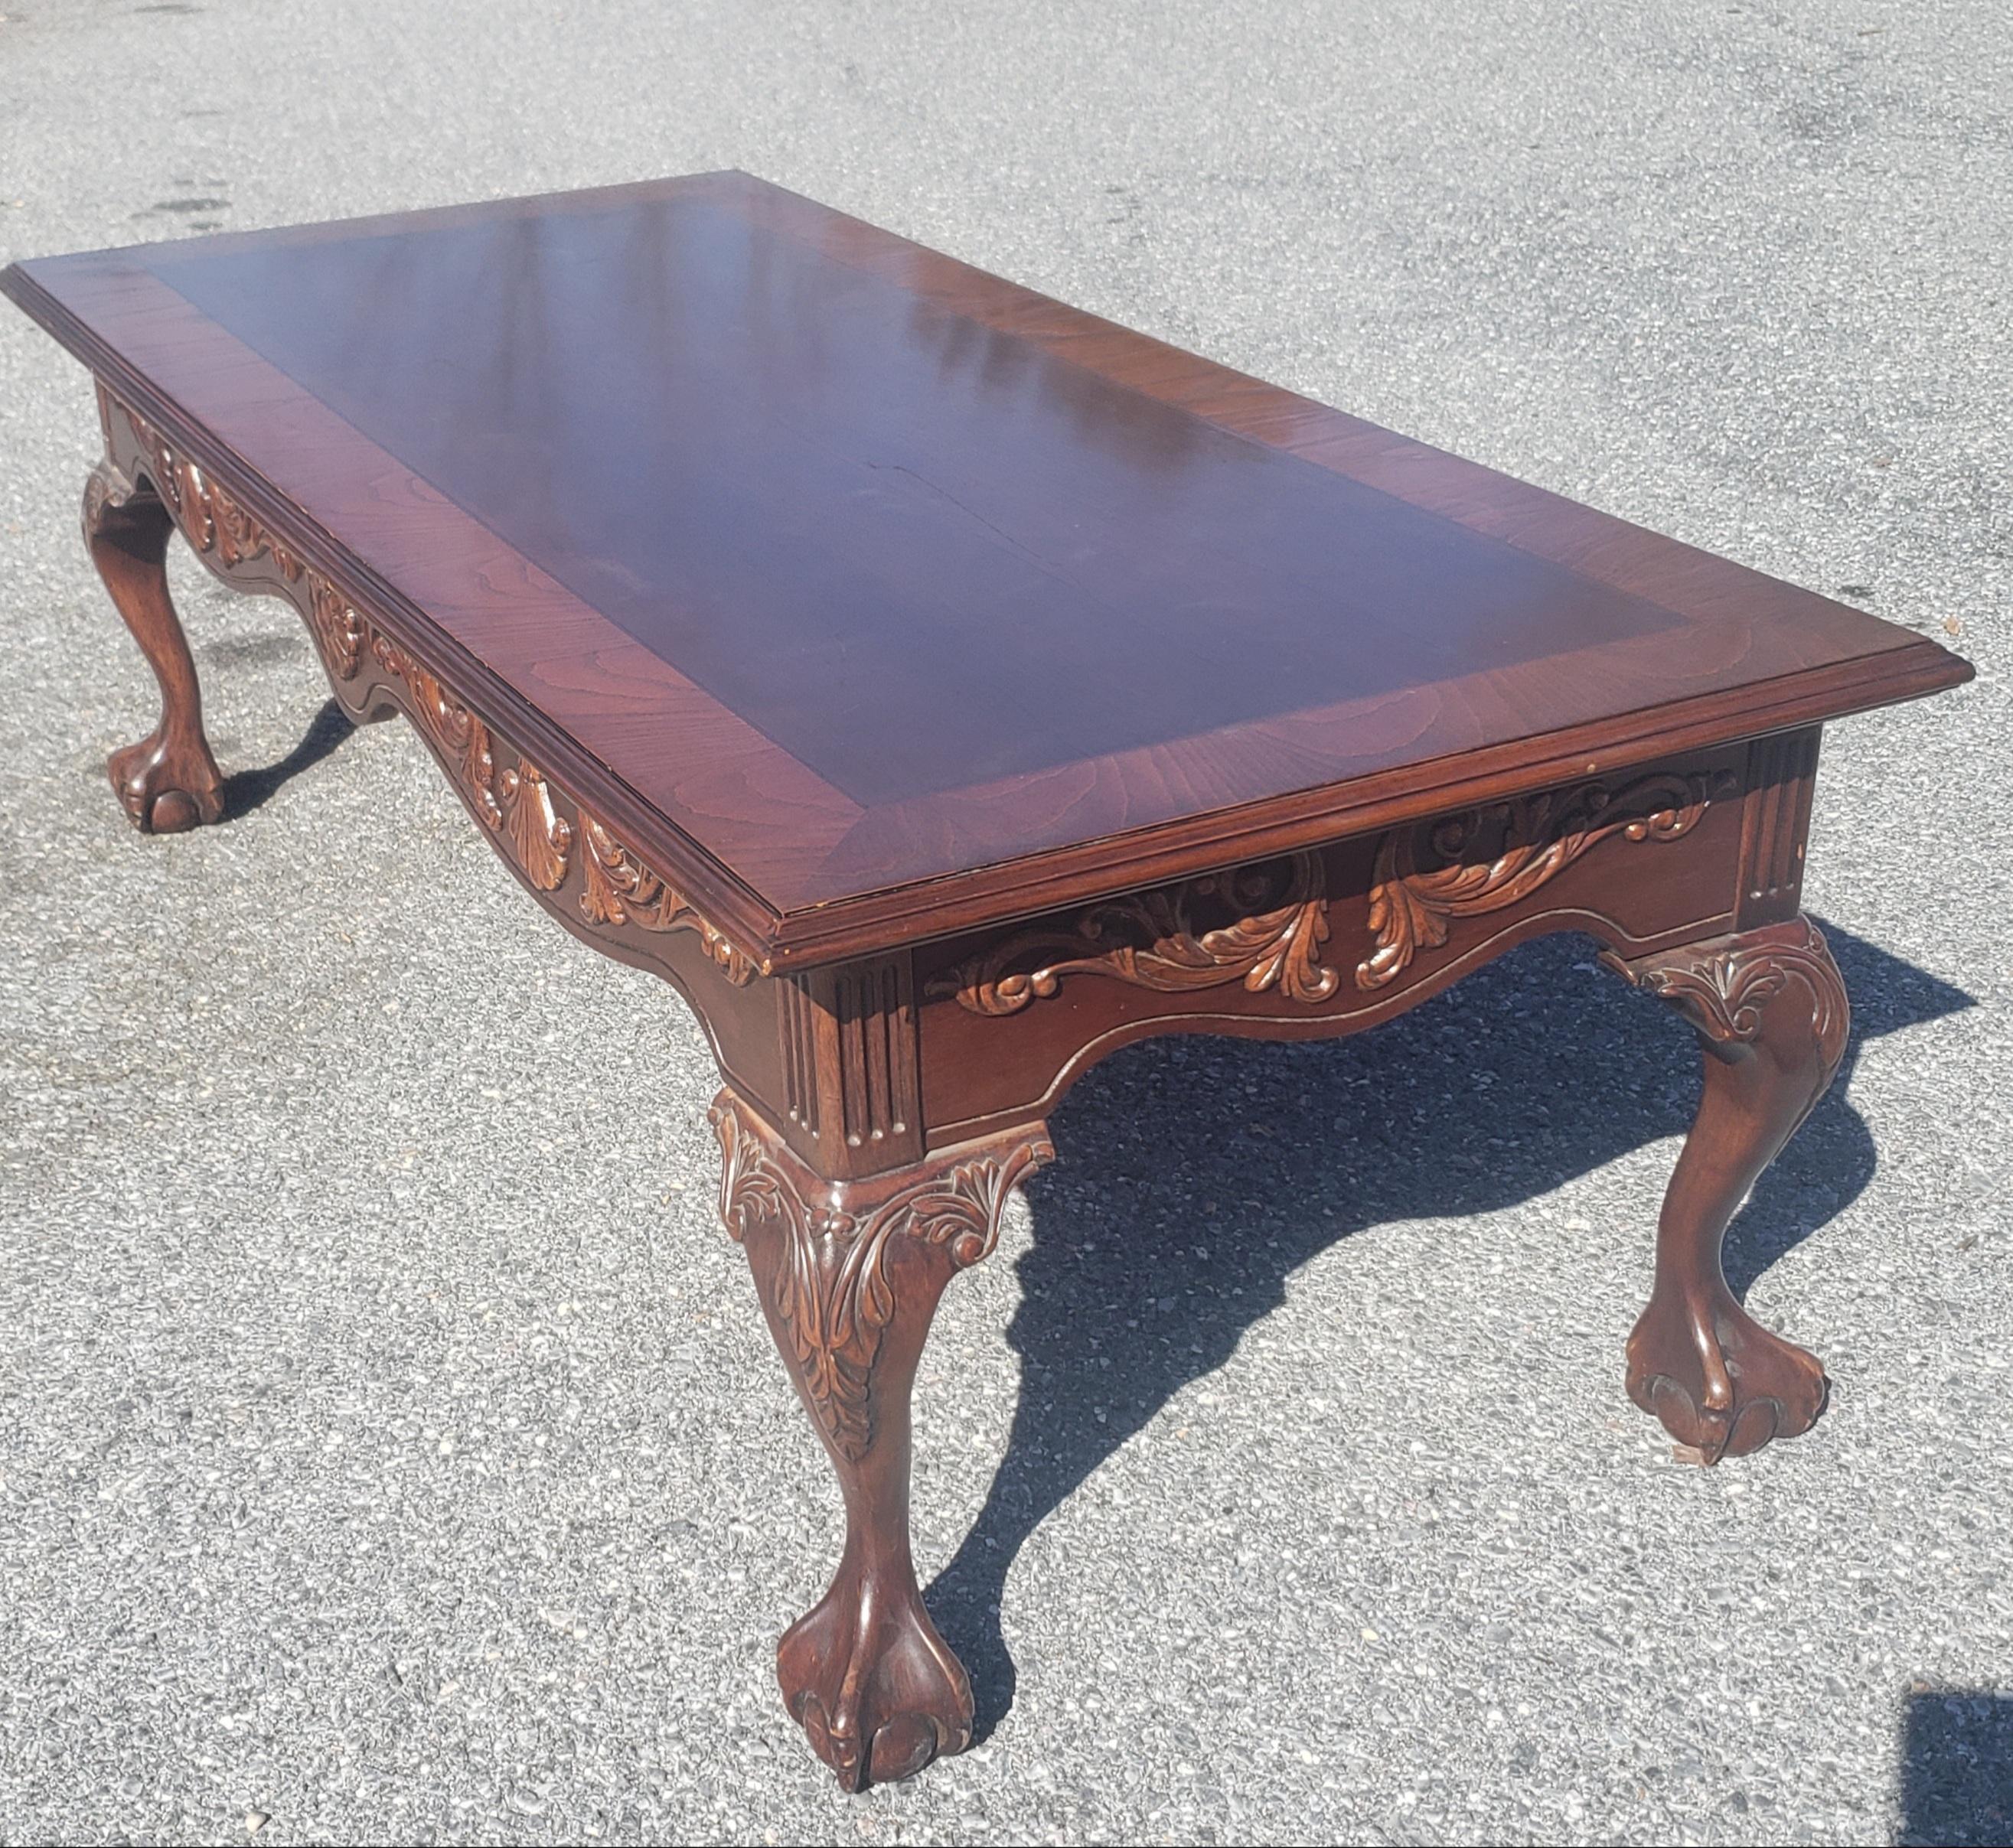 1960s Chippendale style banded top and carved apron mahogany with ball claw feet coffee table.
Measures: 52